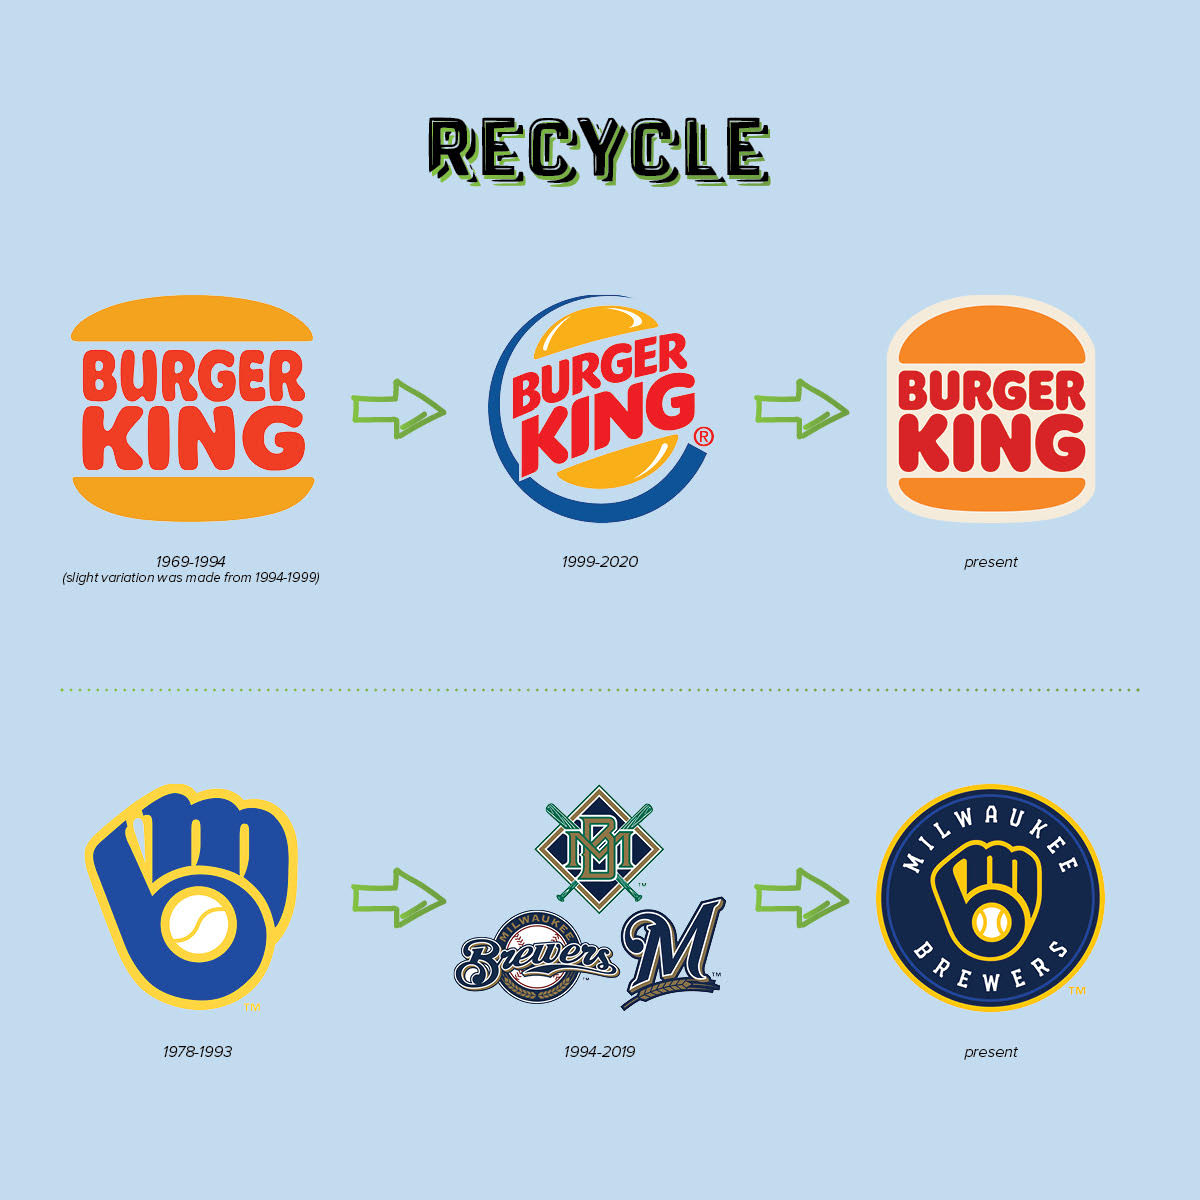 Is Mark Trying To Rebrand Retold Recycling?